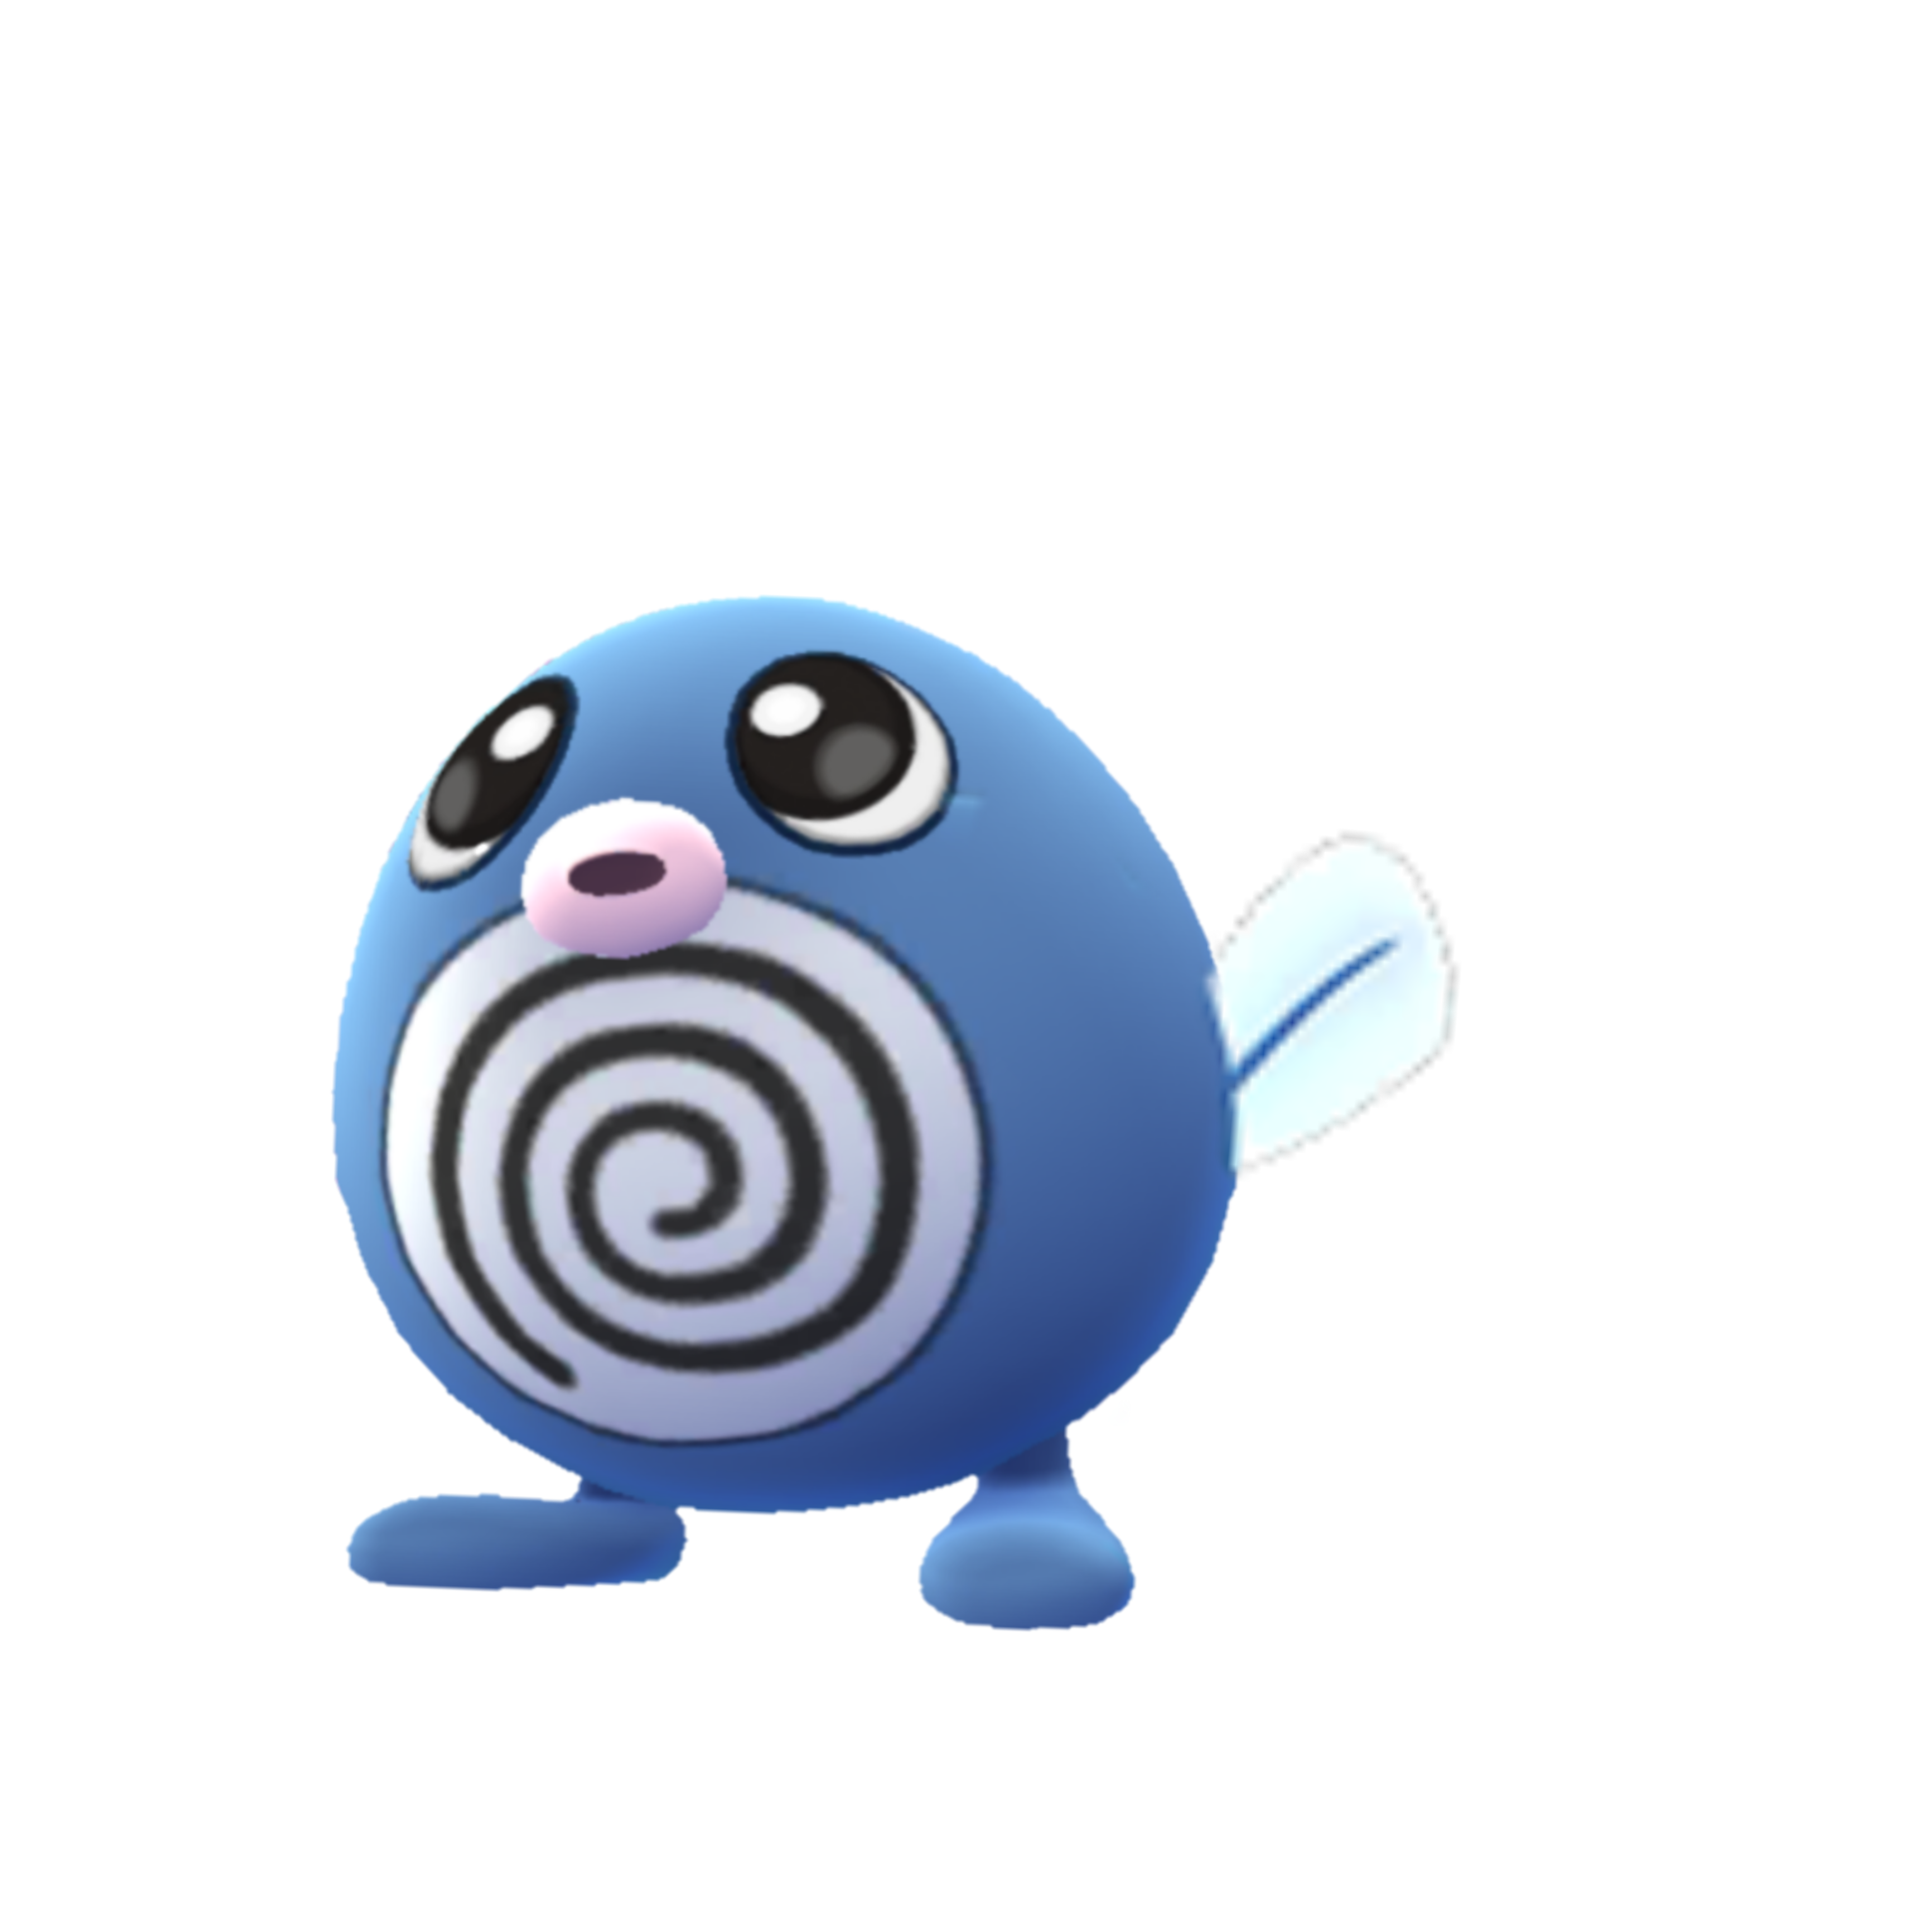 Poliwag Pokemon PNG Pic Background